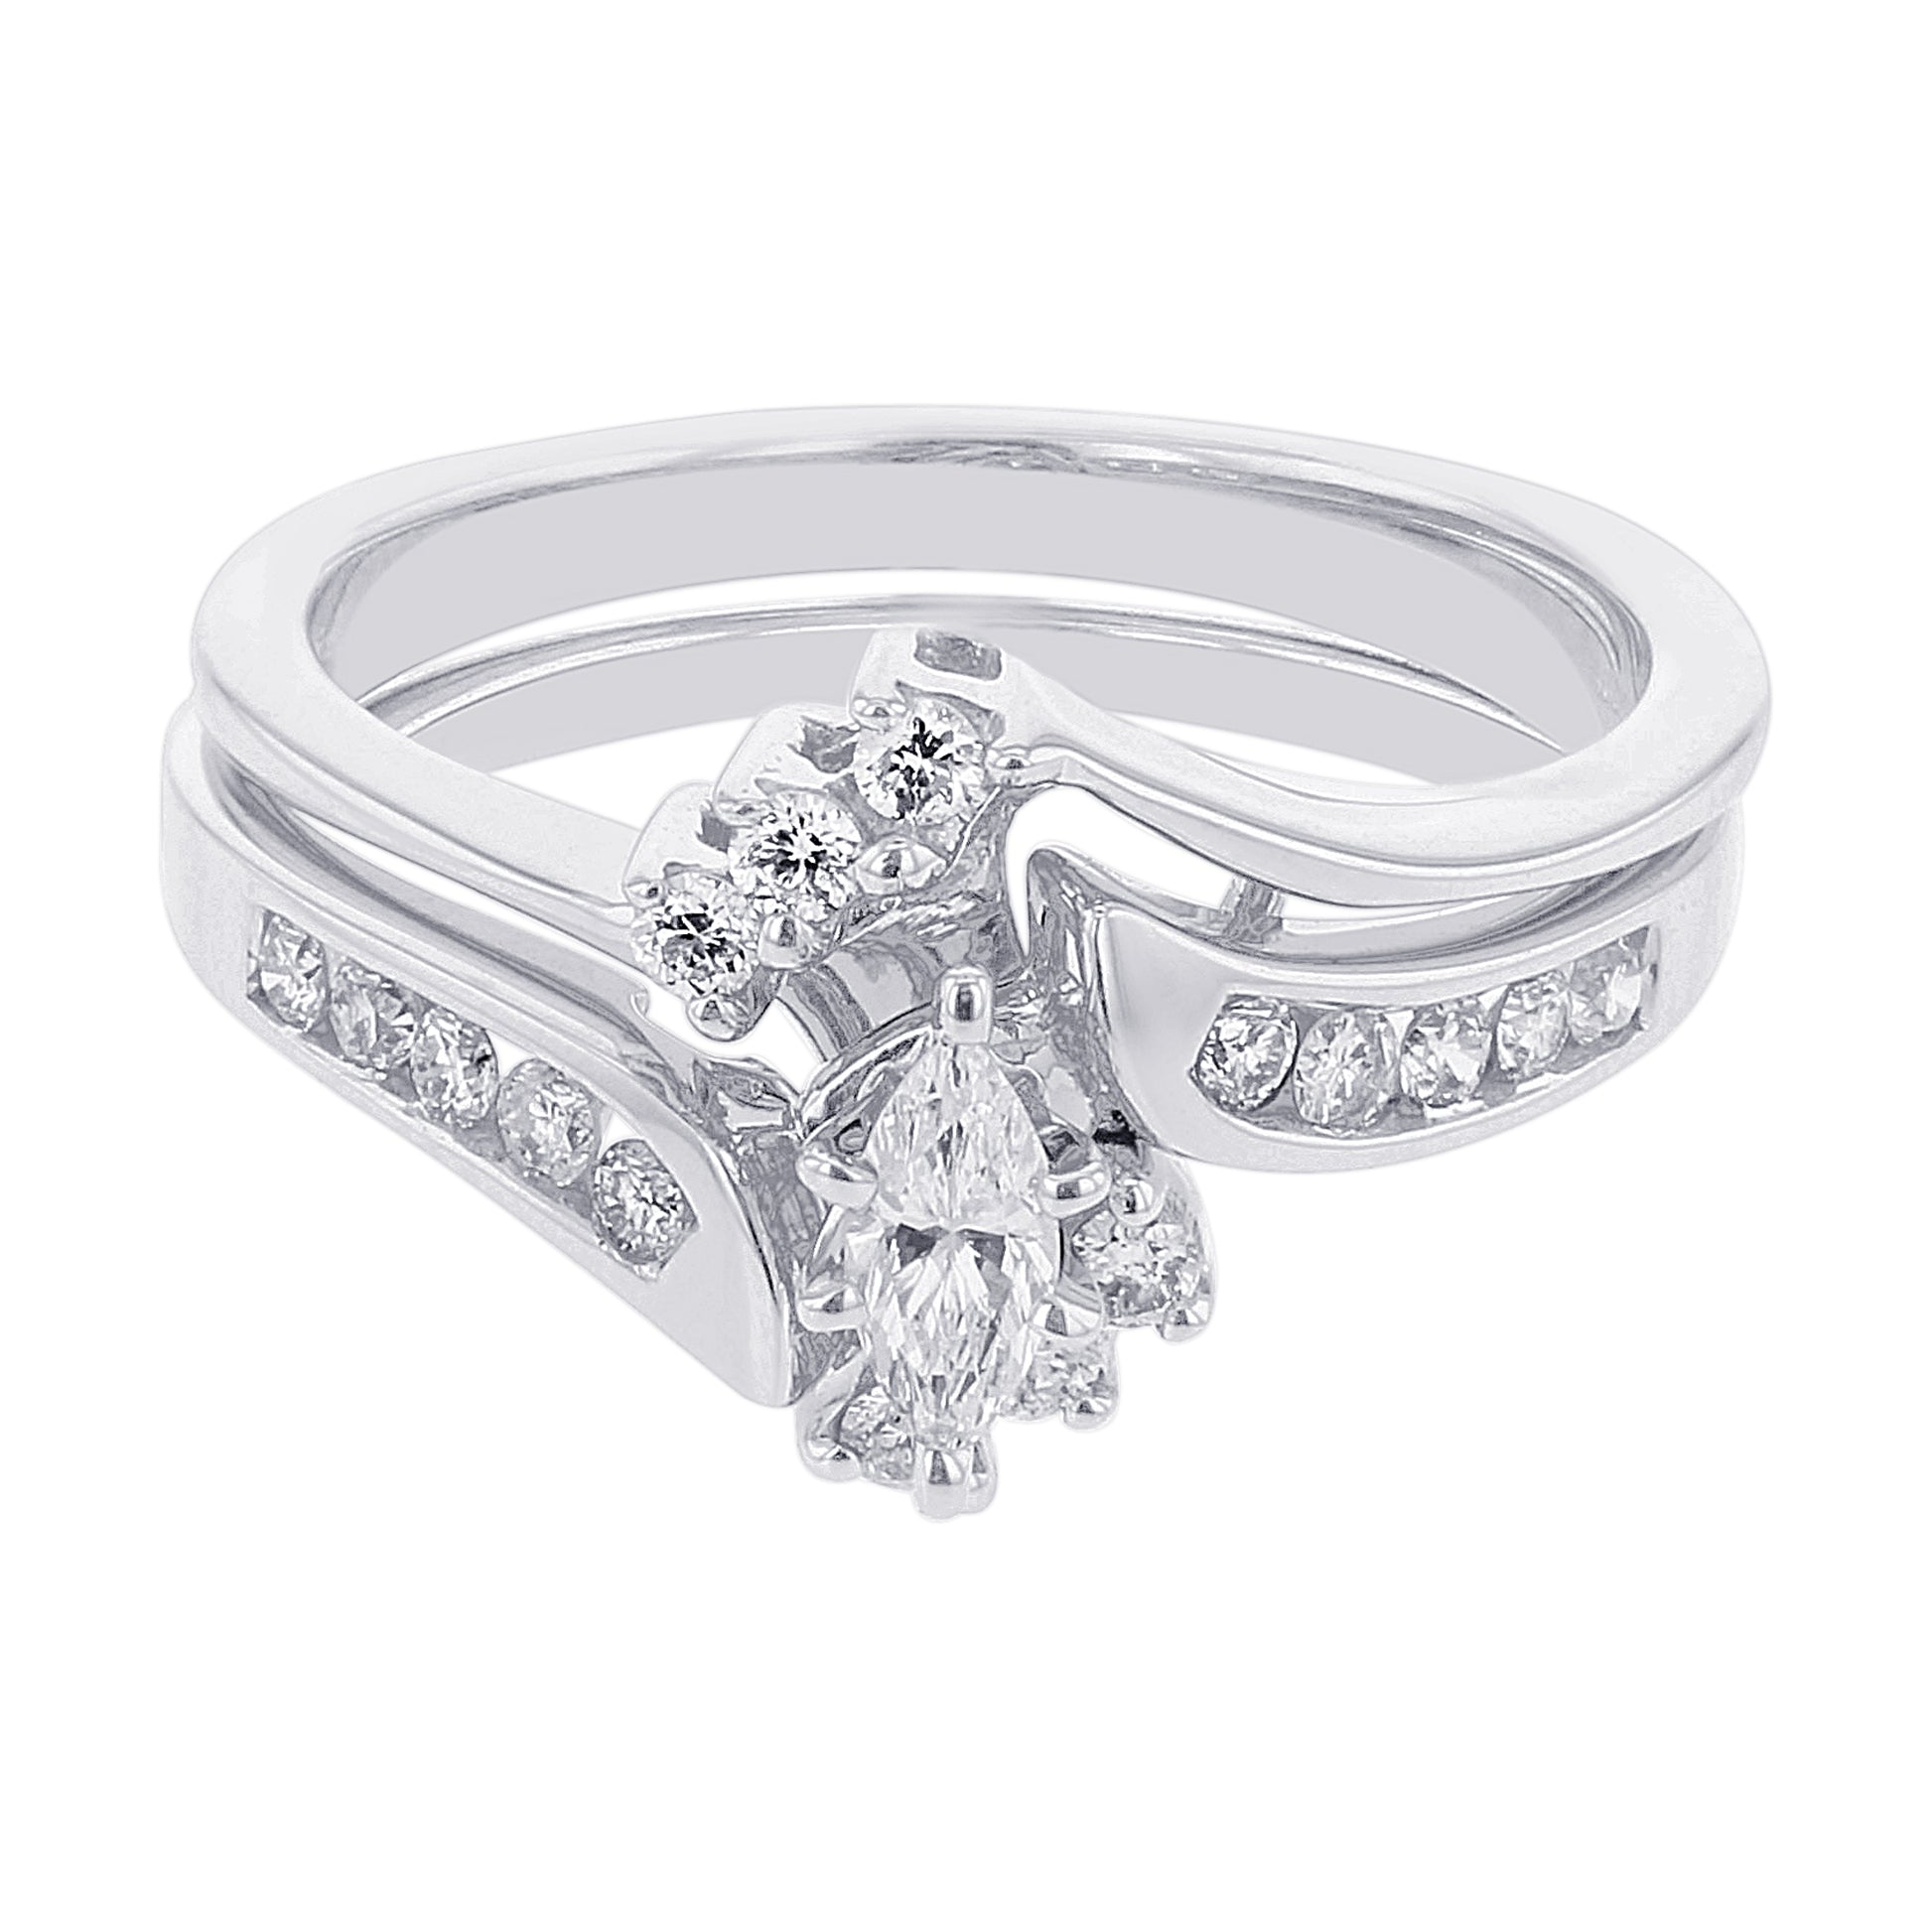 Marquise Diamond Ready For Love Bridal Set 1/2ct